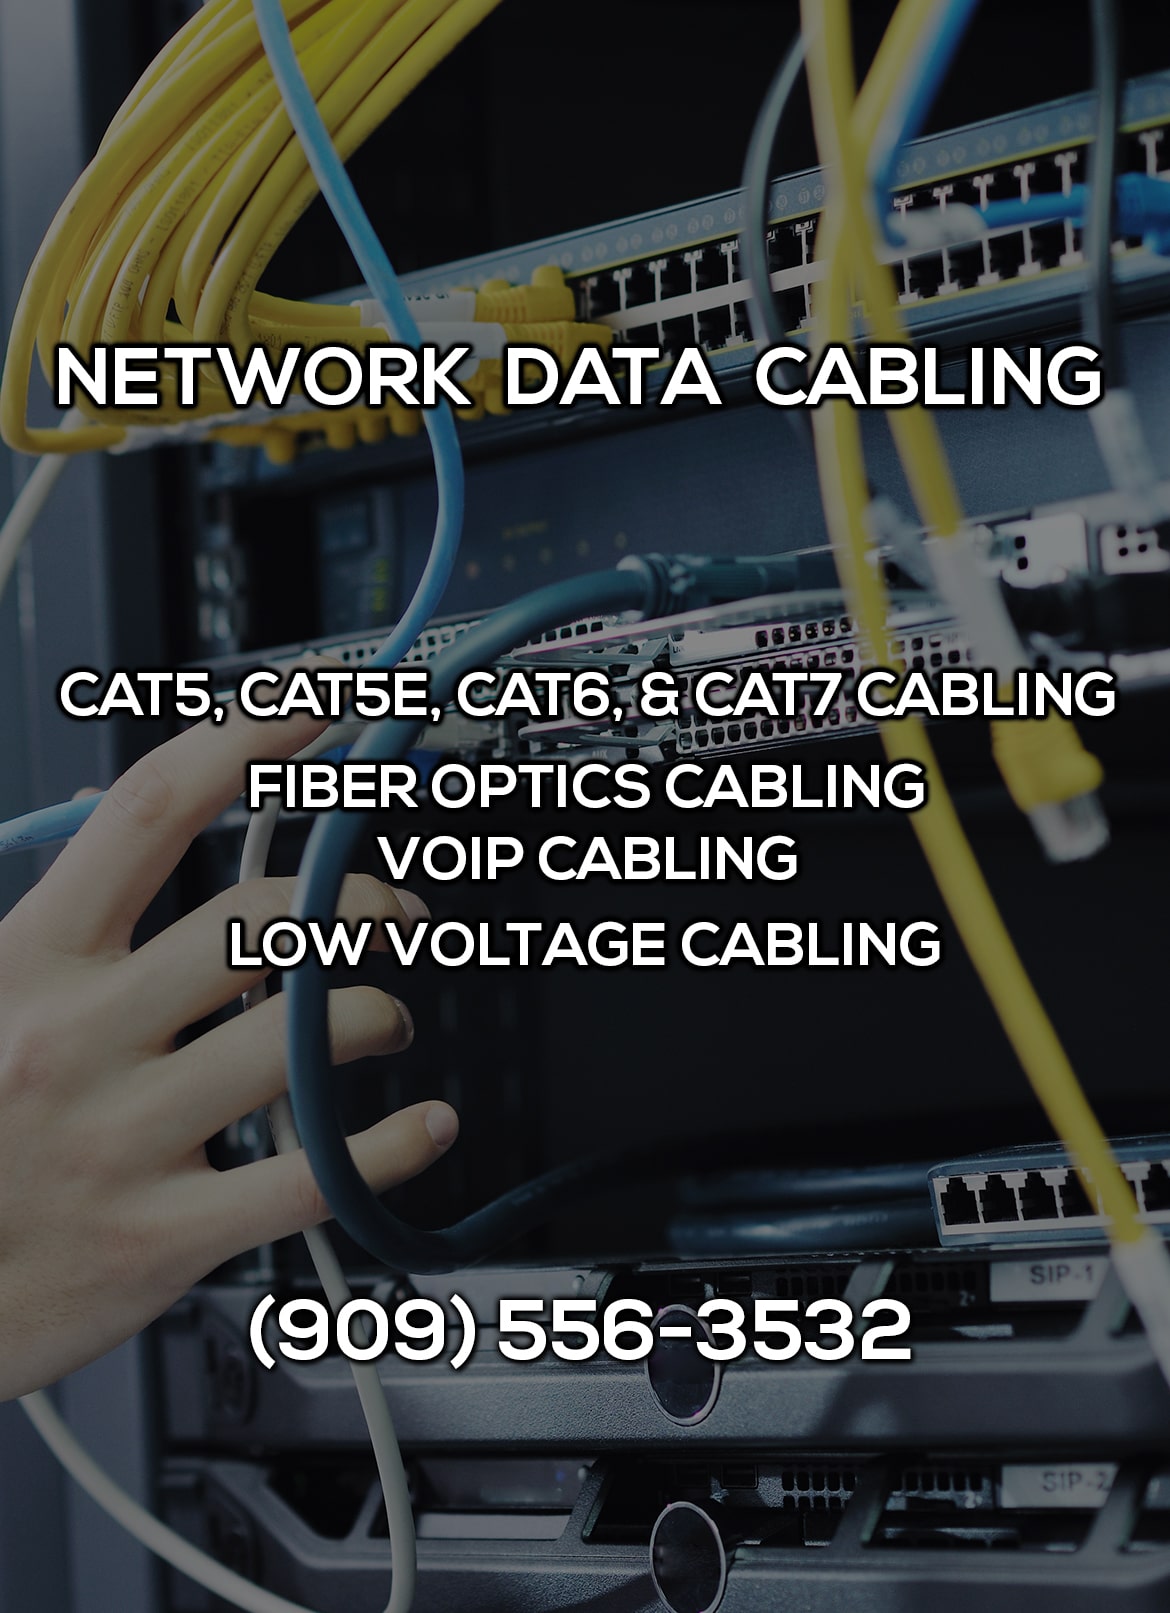 Network Data Cabling in Rancho Cucamonga CA